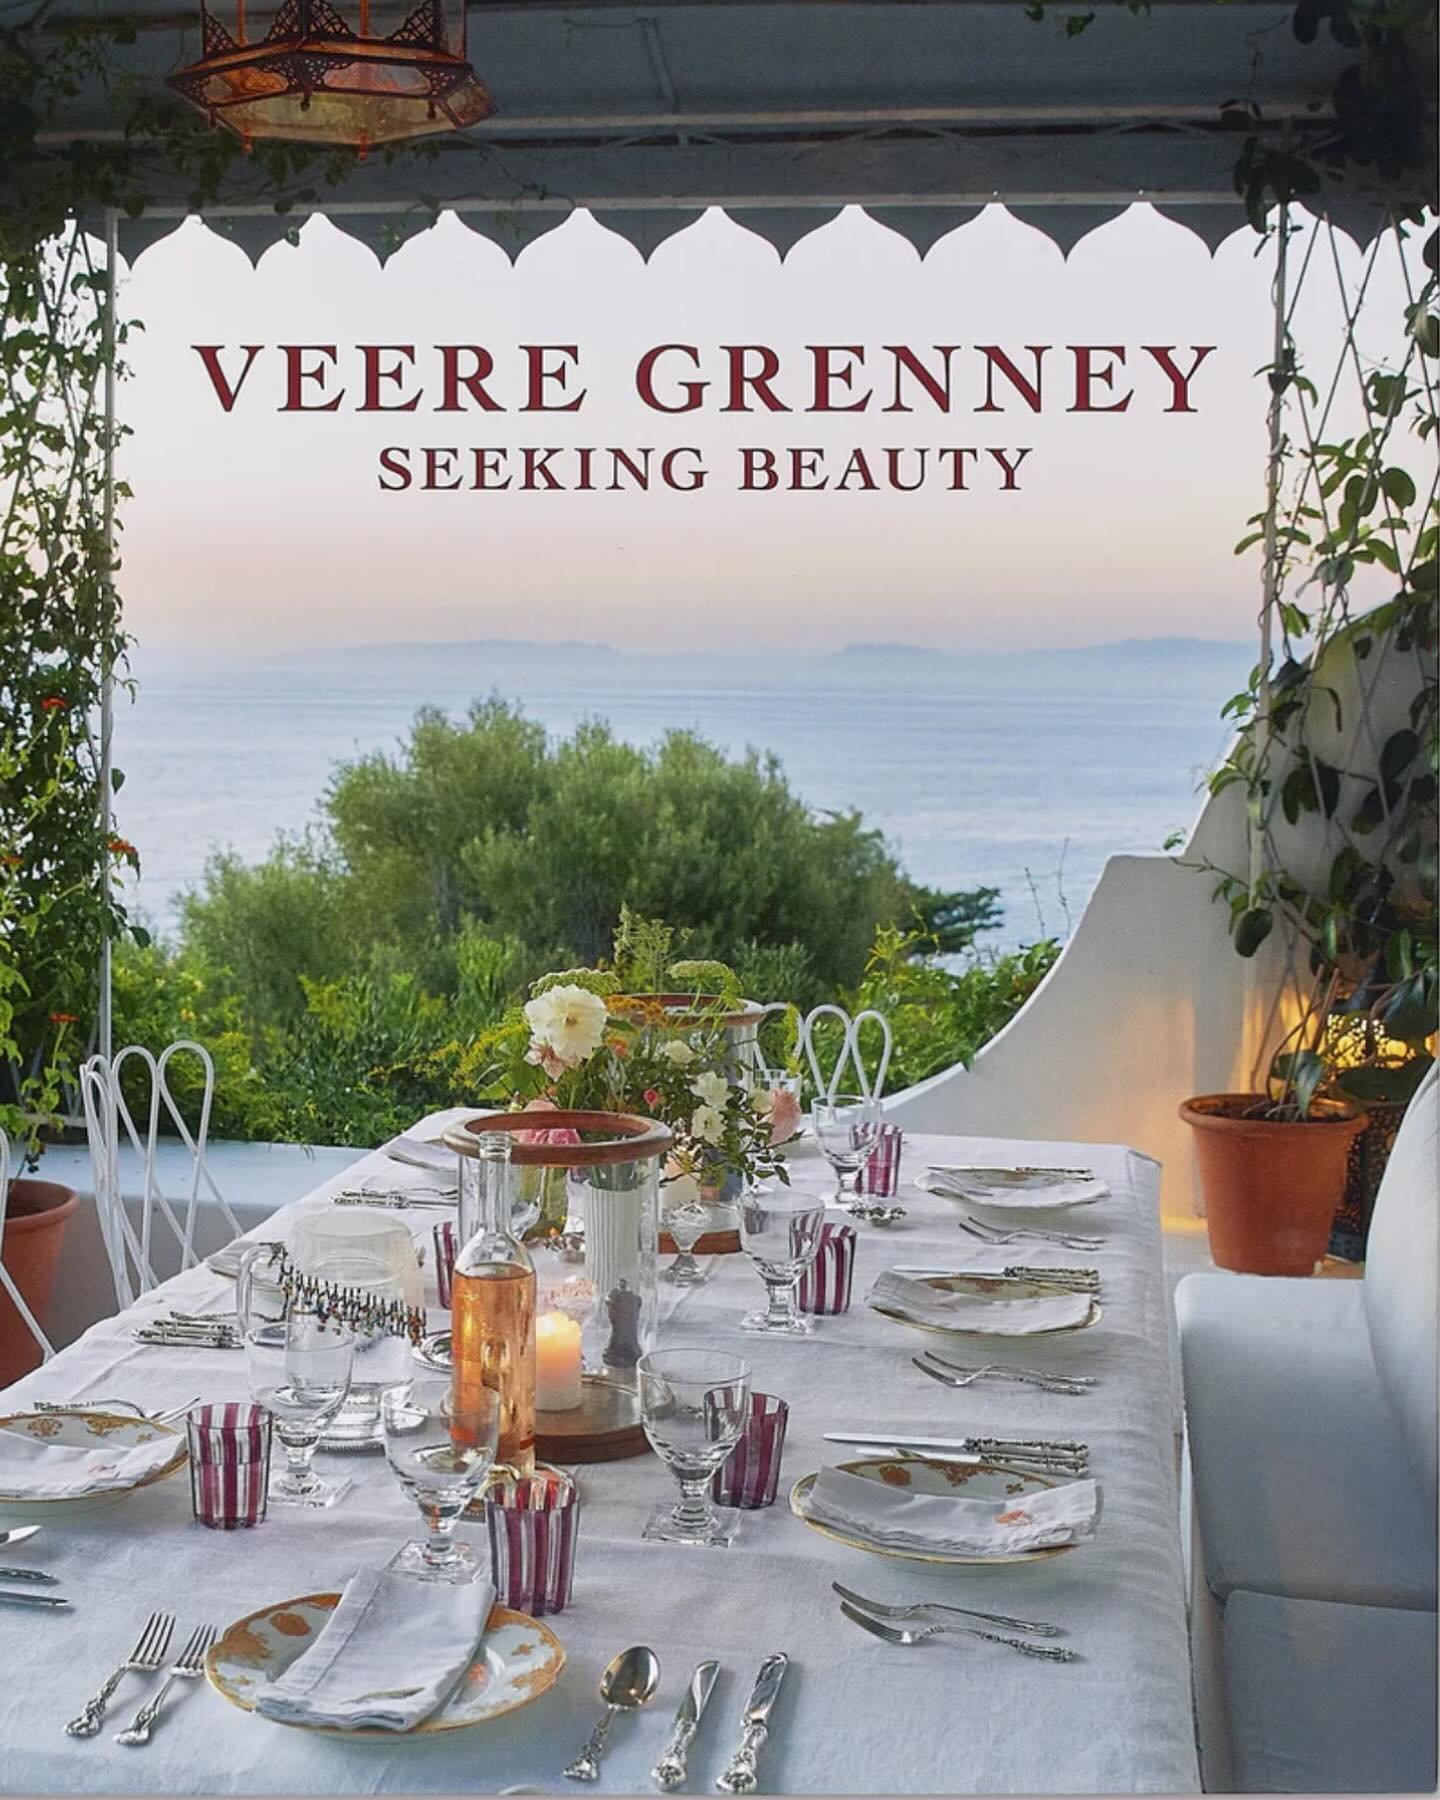 We are thrilled to be hosting @veere_grenney this Friday from 11:00 to 12:30 at Emily Joubert in San Francisco! Be sure and stop by to meet this designing legend!🤎